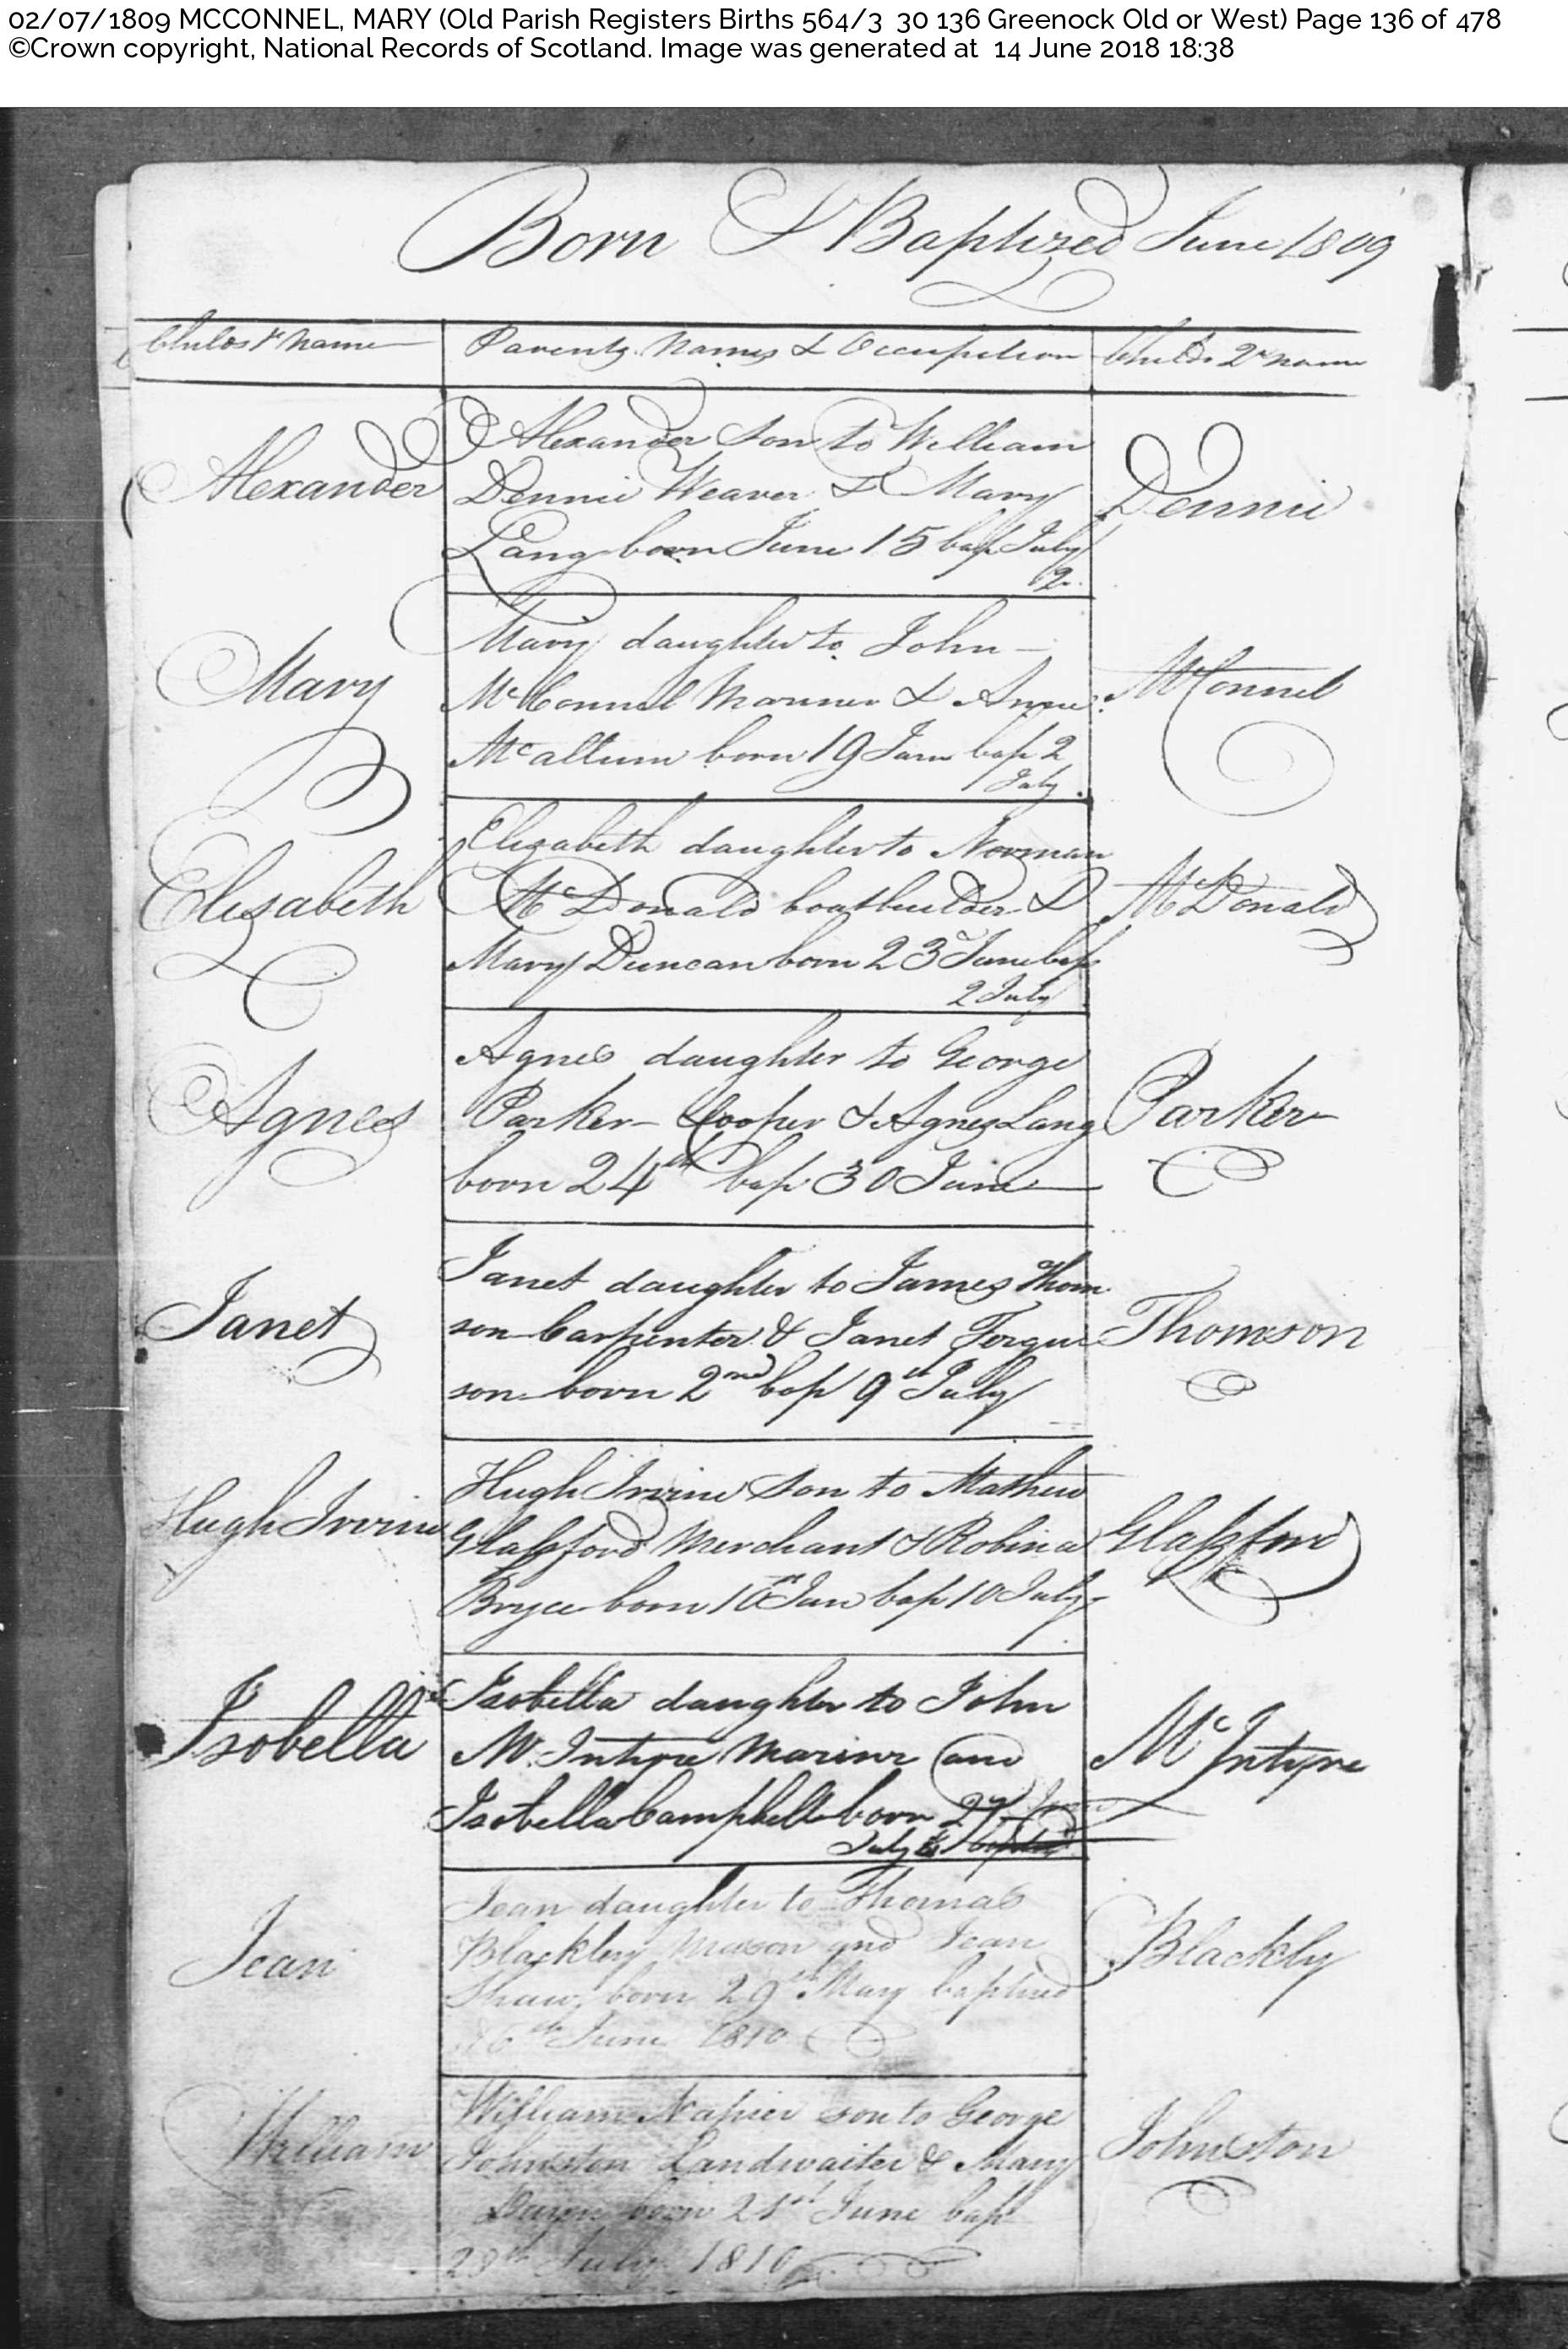 MaryConnell_B1809 Greenock, July 2, 1809, Linked To: <a href='i2561.html' >Ann McCallum</a> and <a href='i2558.html' >John Connell 溺</a>